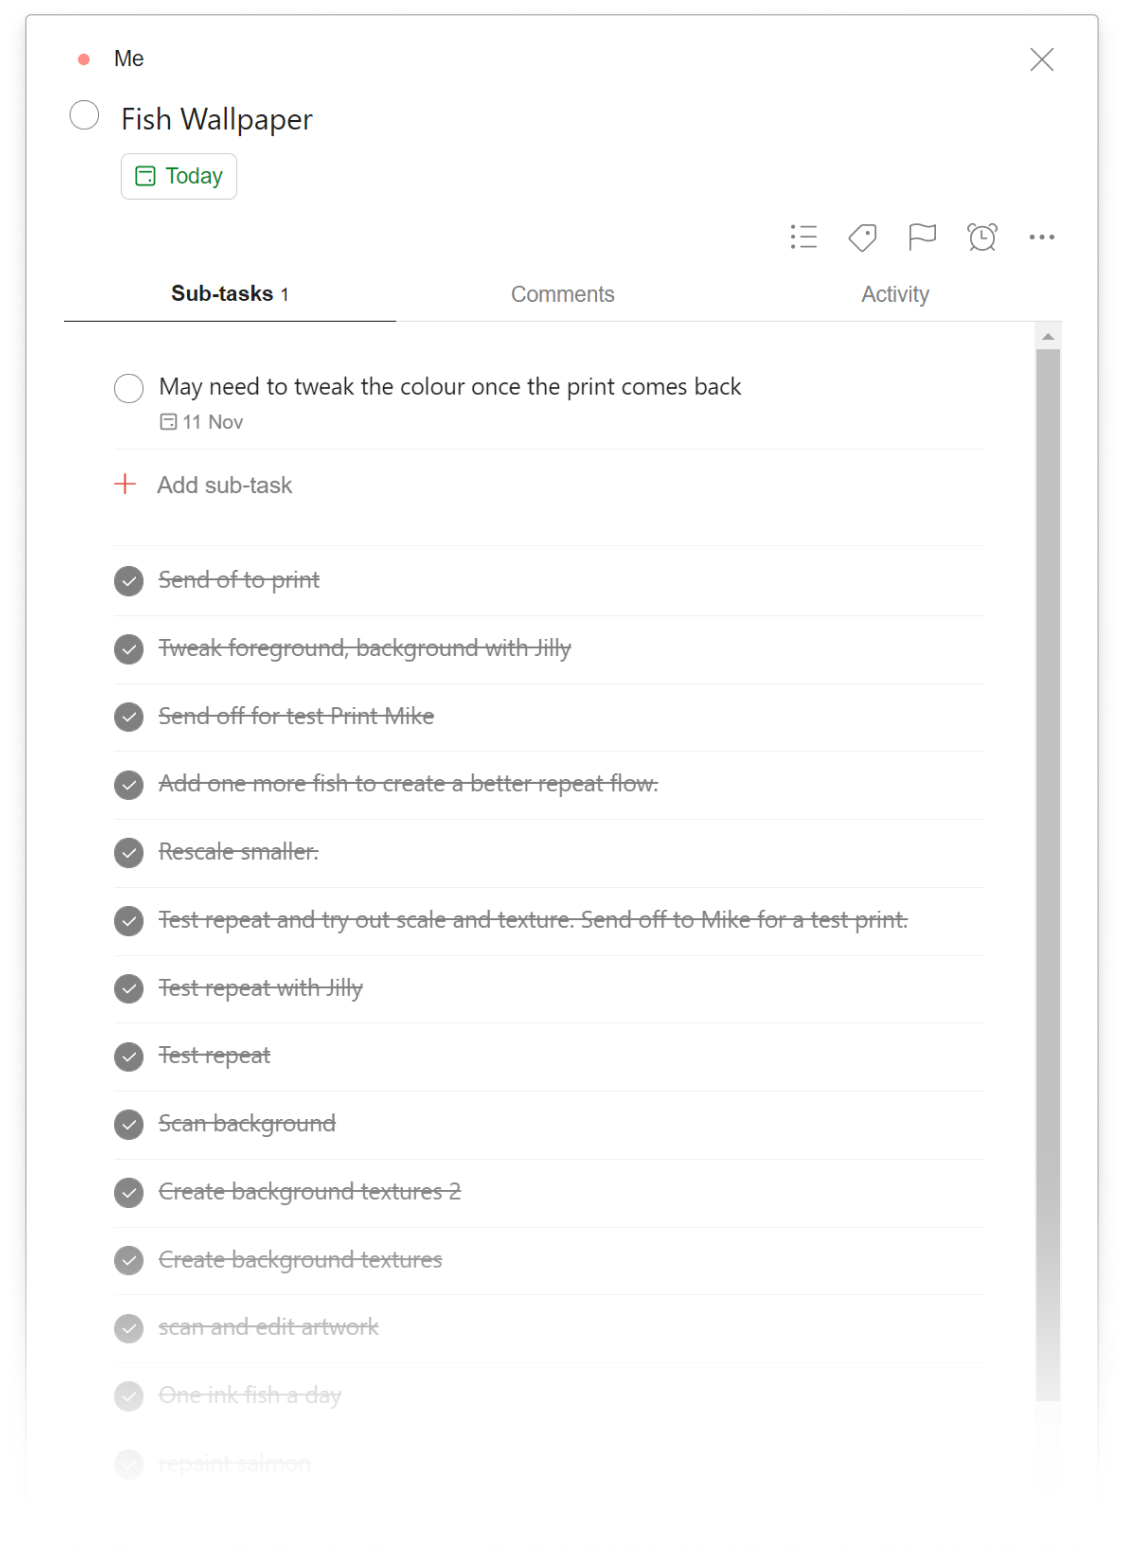 sian zeng user story todoist collection project